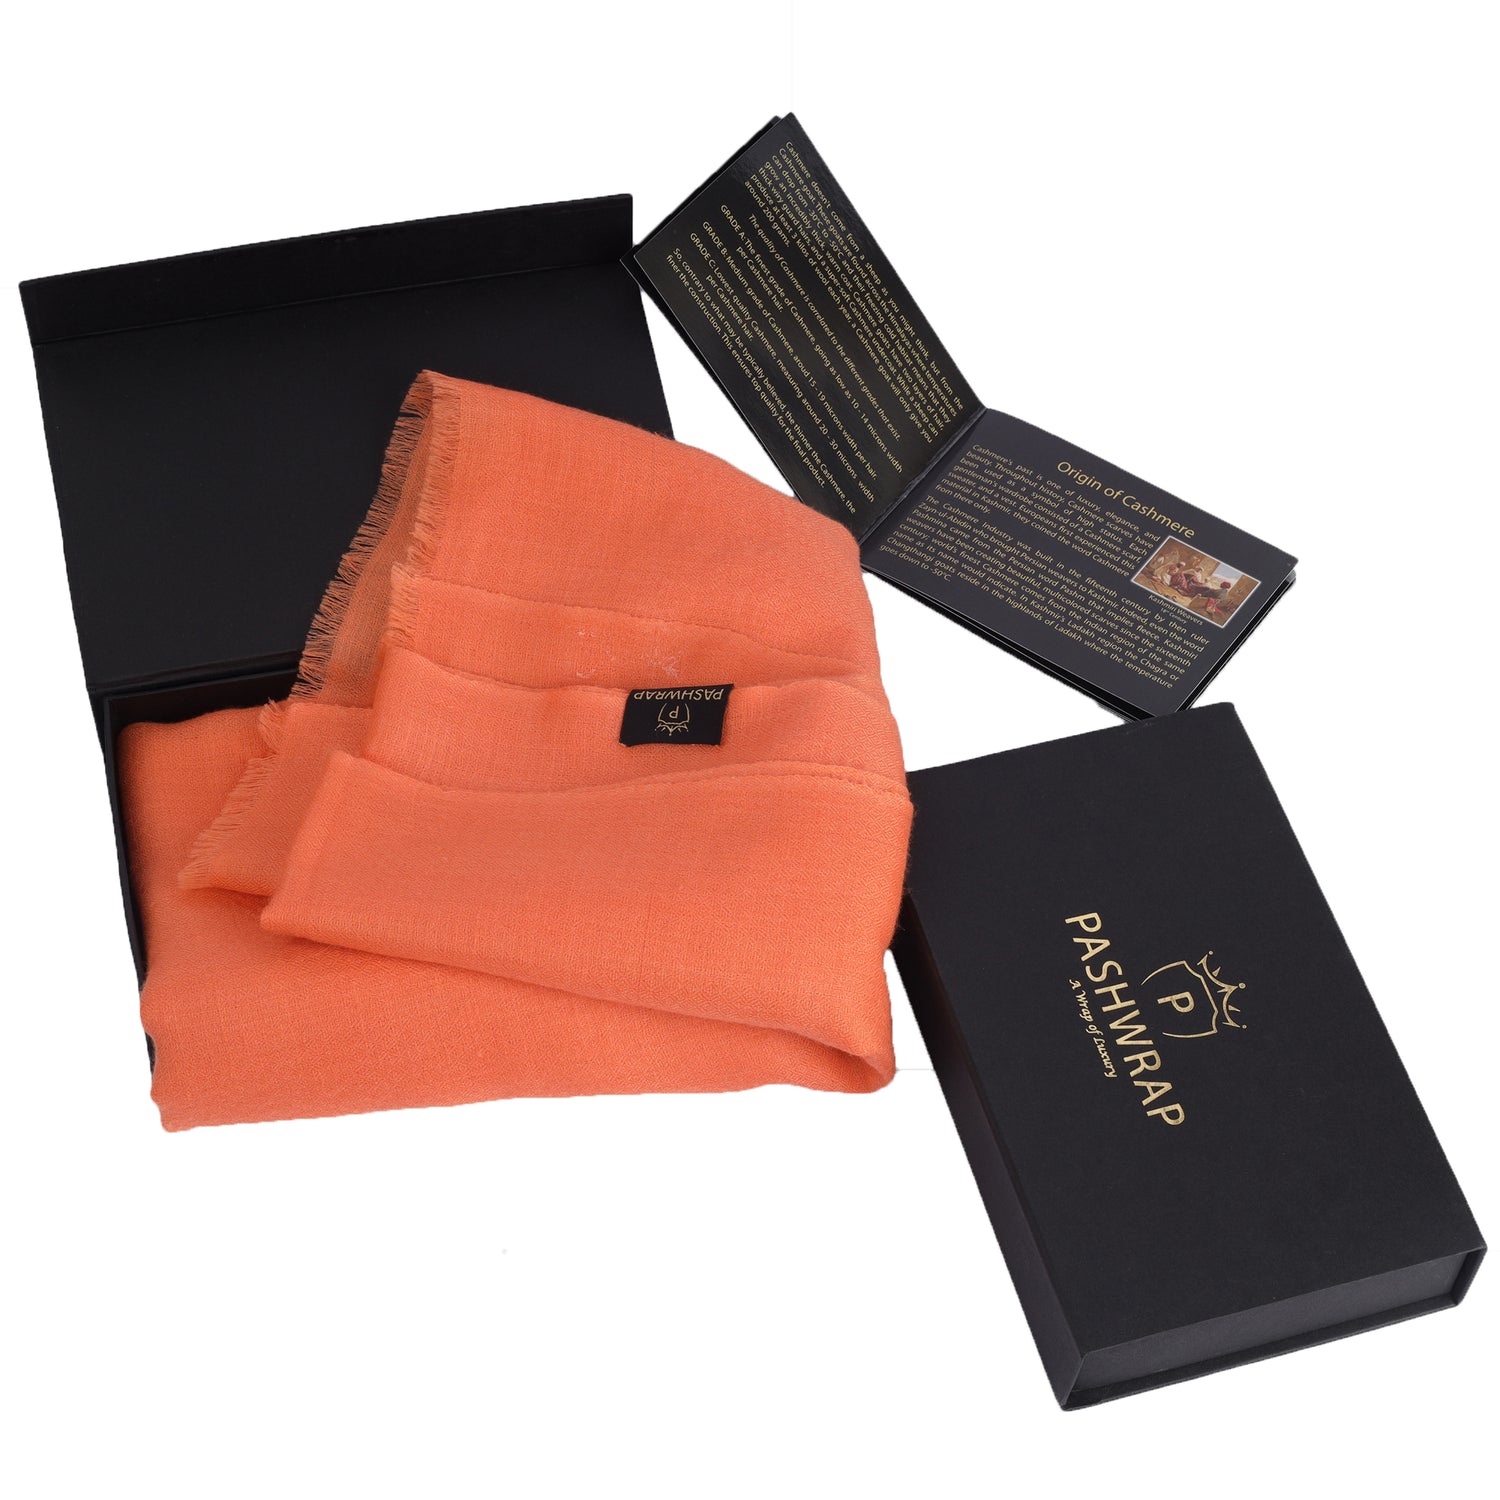 Cashmere Scarf packaged in a Black Gift box packaging of Pashwrap with a product handbook